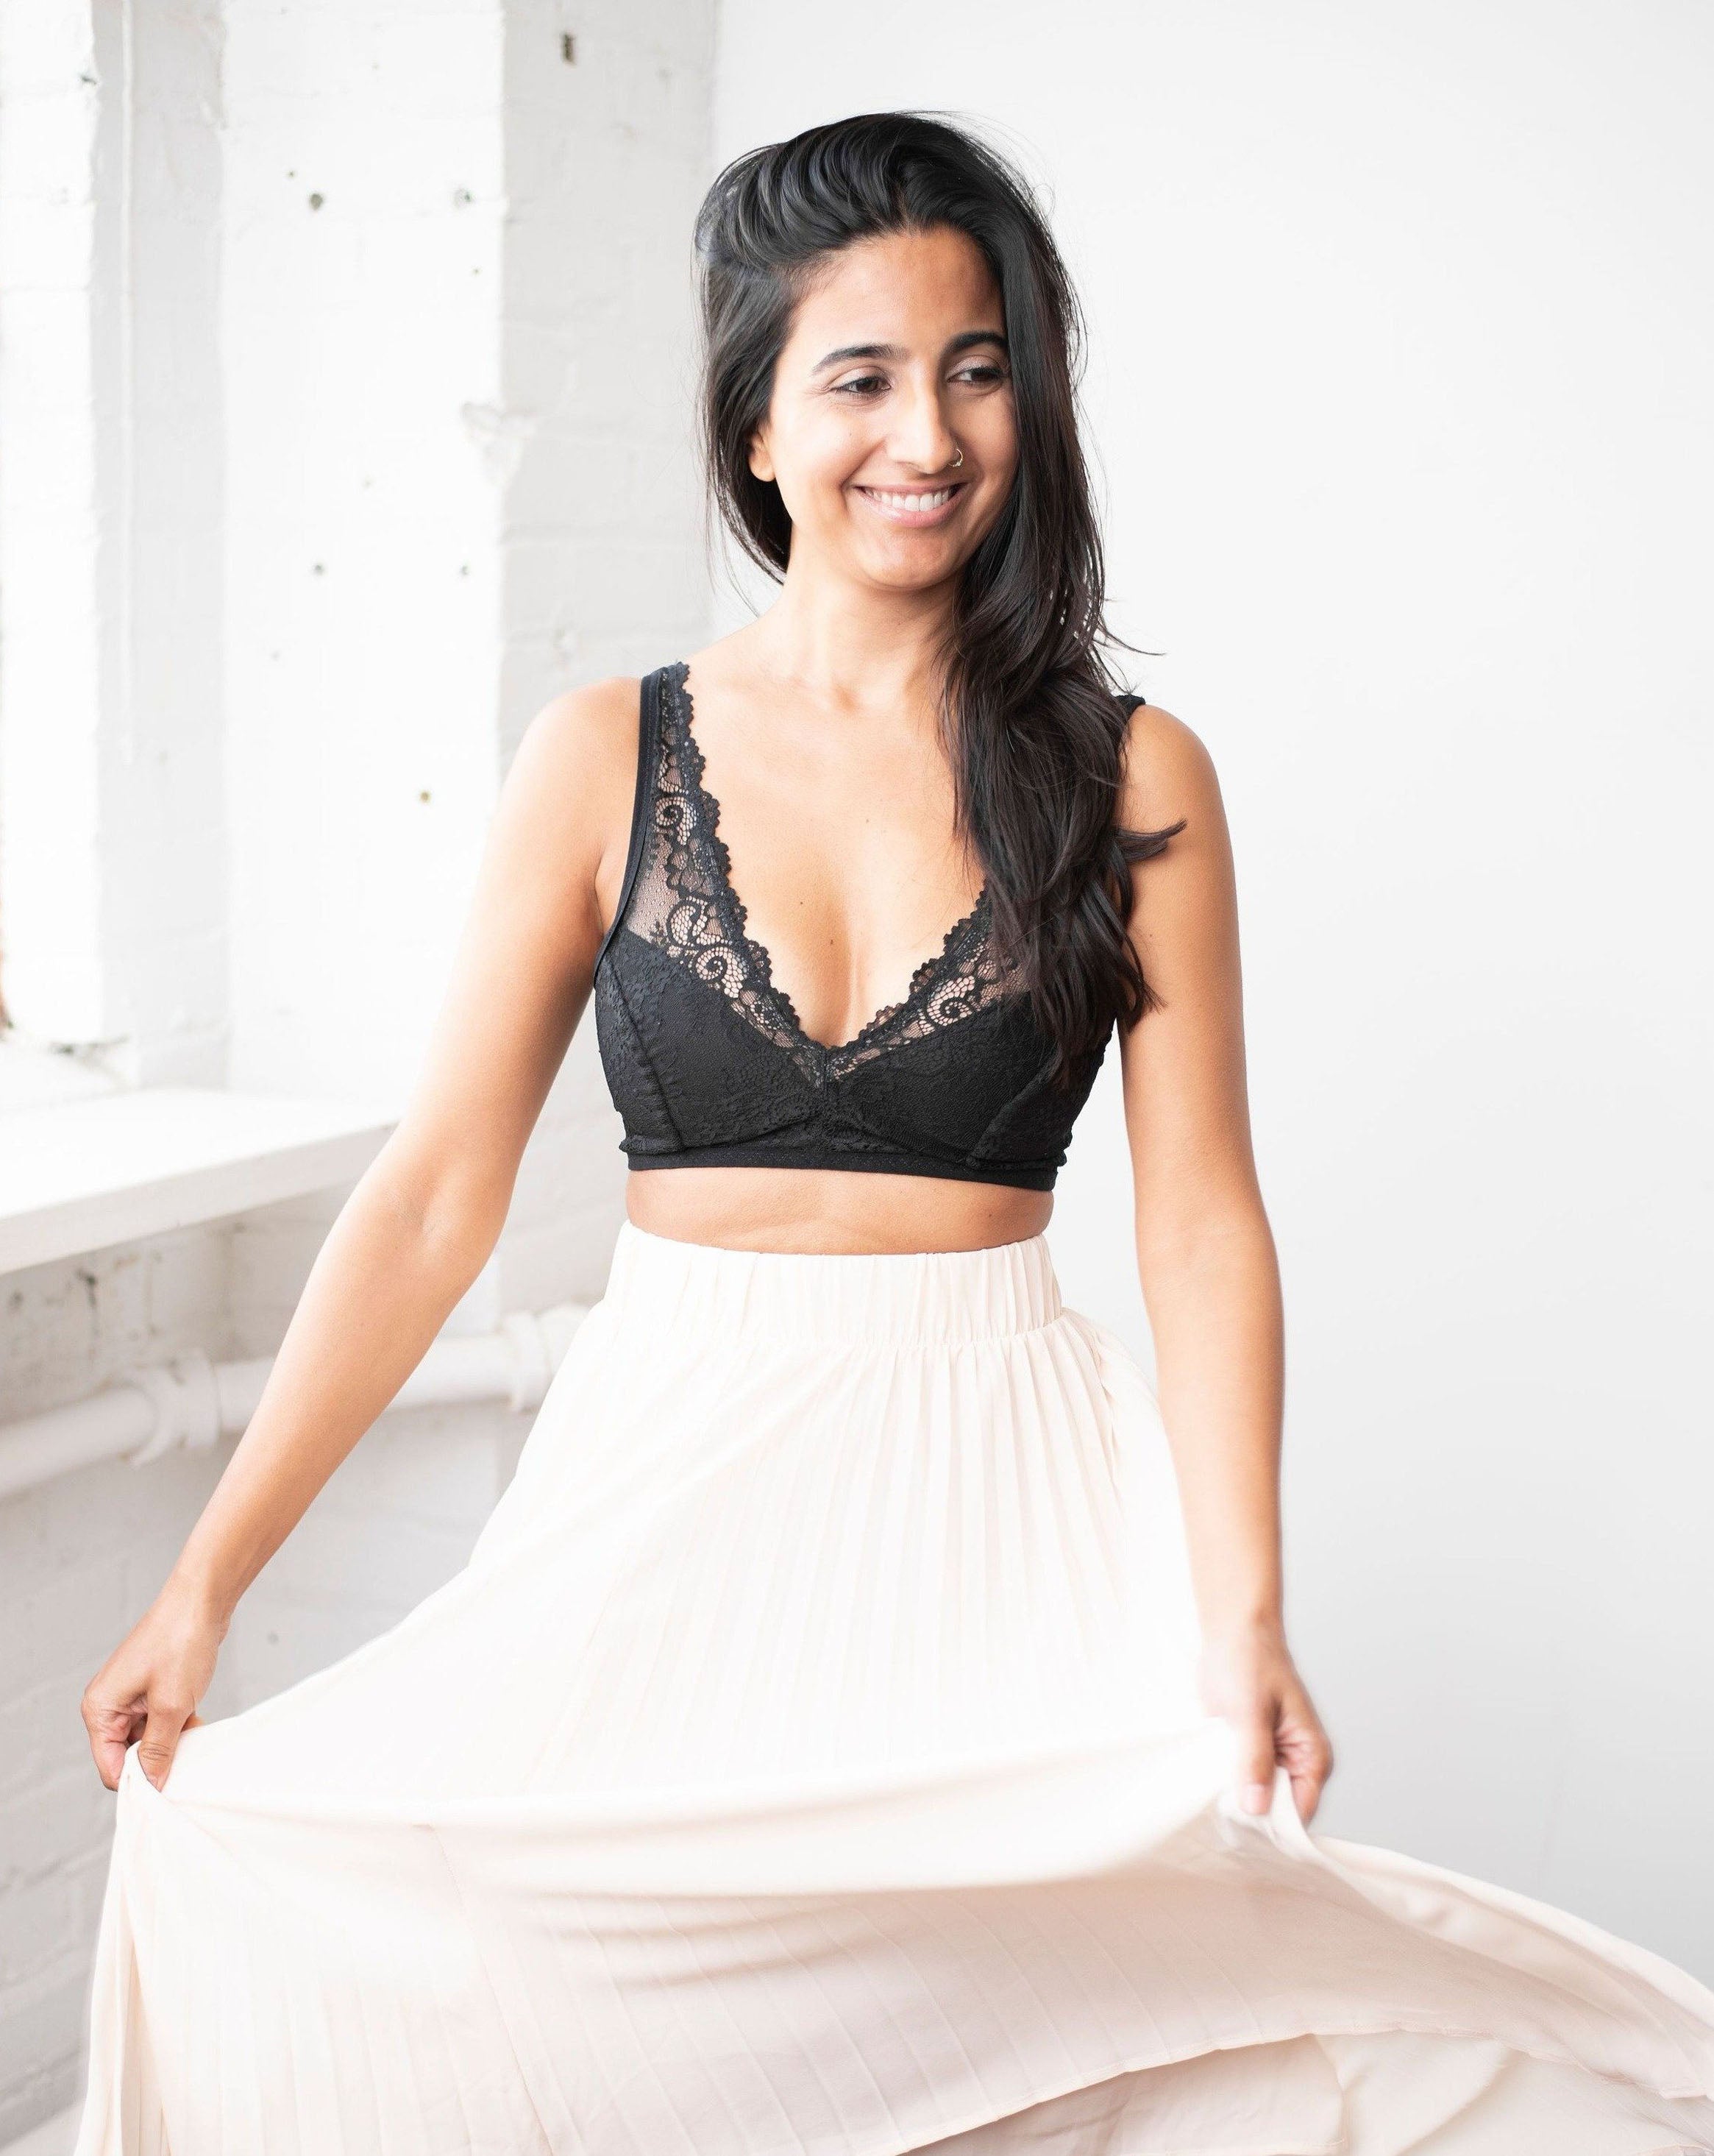 Ruhee with Rubies Bras, a female with long black hair wearing a black scalloped lace wirefree bra with deep plunge v neckline. Full front body shot on white back drop.